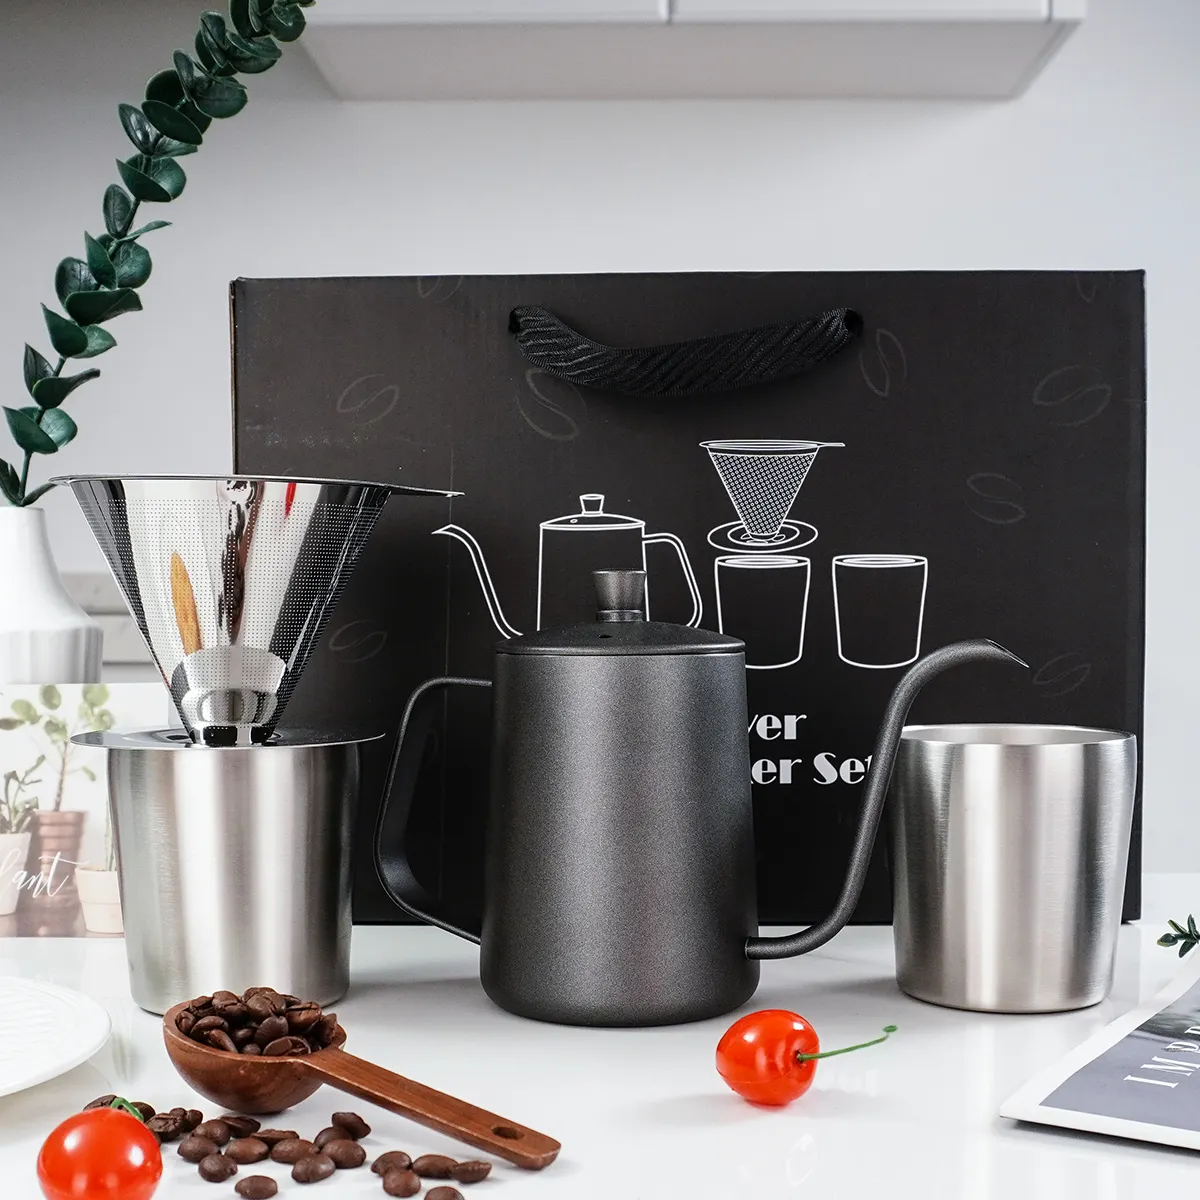 Christmas Premium Gift Box Reusable Stainless Steel Coffee Pot Filter Tools Drip Hand Espresso Pour Over v60 Coffee Maker Set